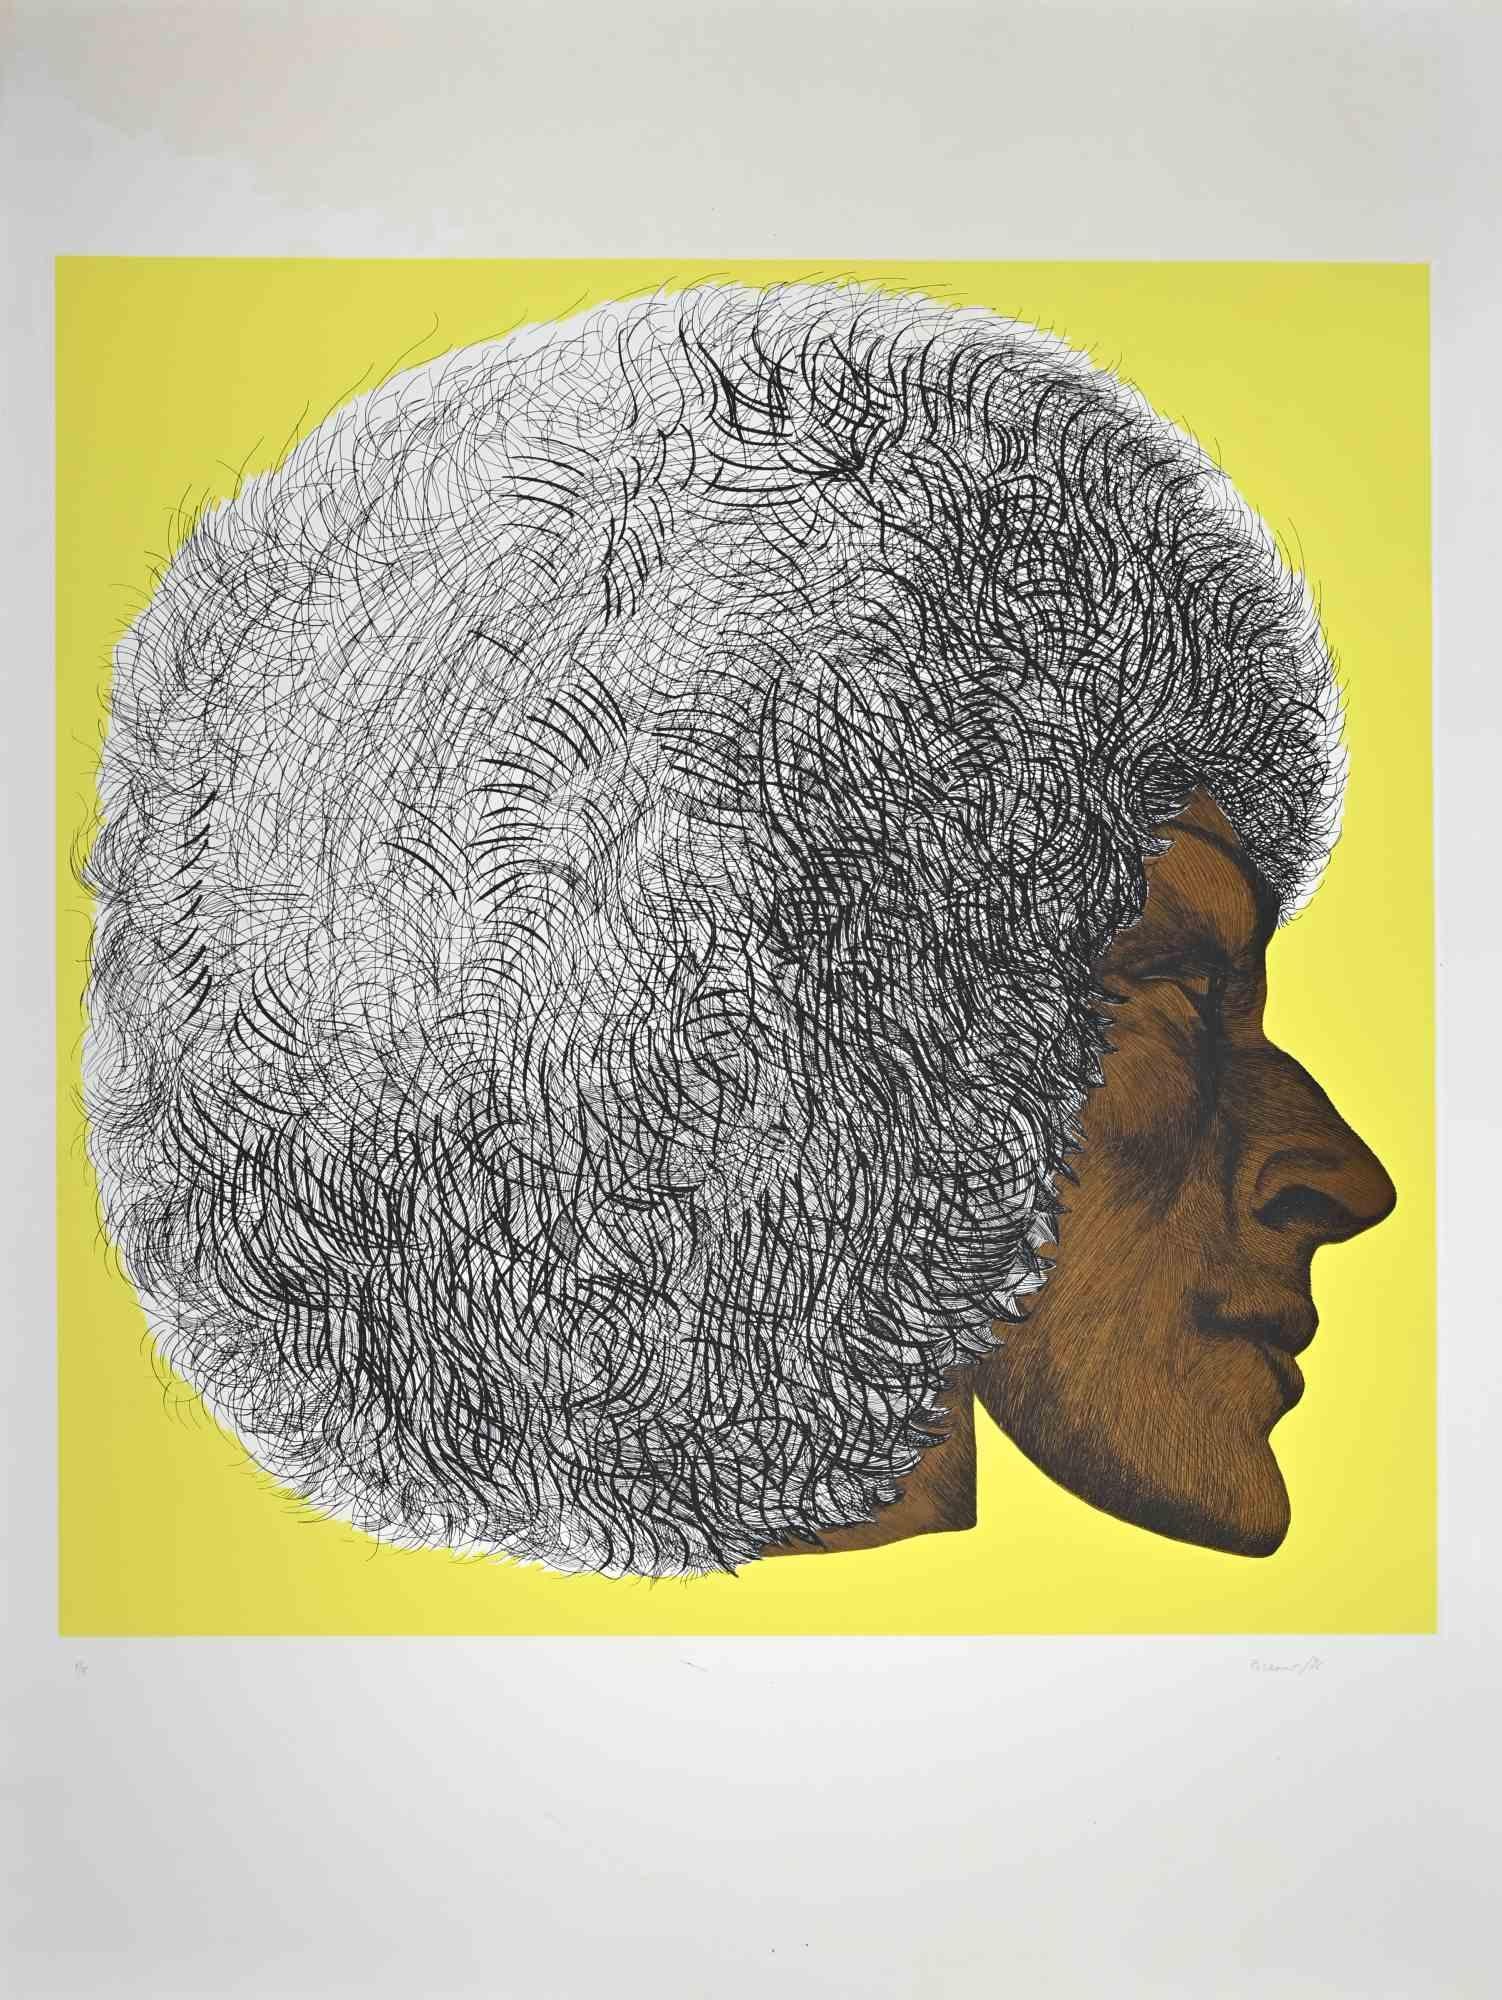 Profile Yellow II - Profilo giallo II is a contemporary artwork realized by Giacomo Porzano in 1972.

Hand signed and dated by artist with pencil.

Numbered on the lower margin. Edition of 1/5